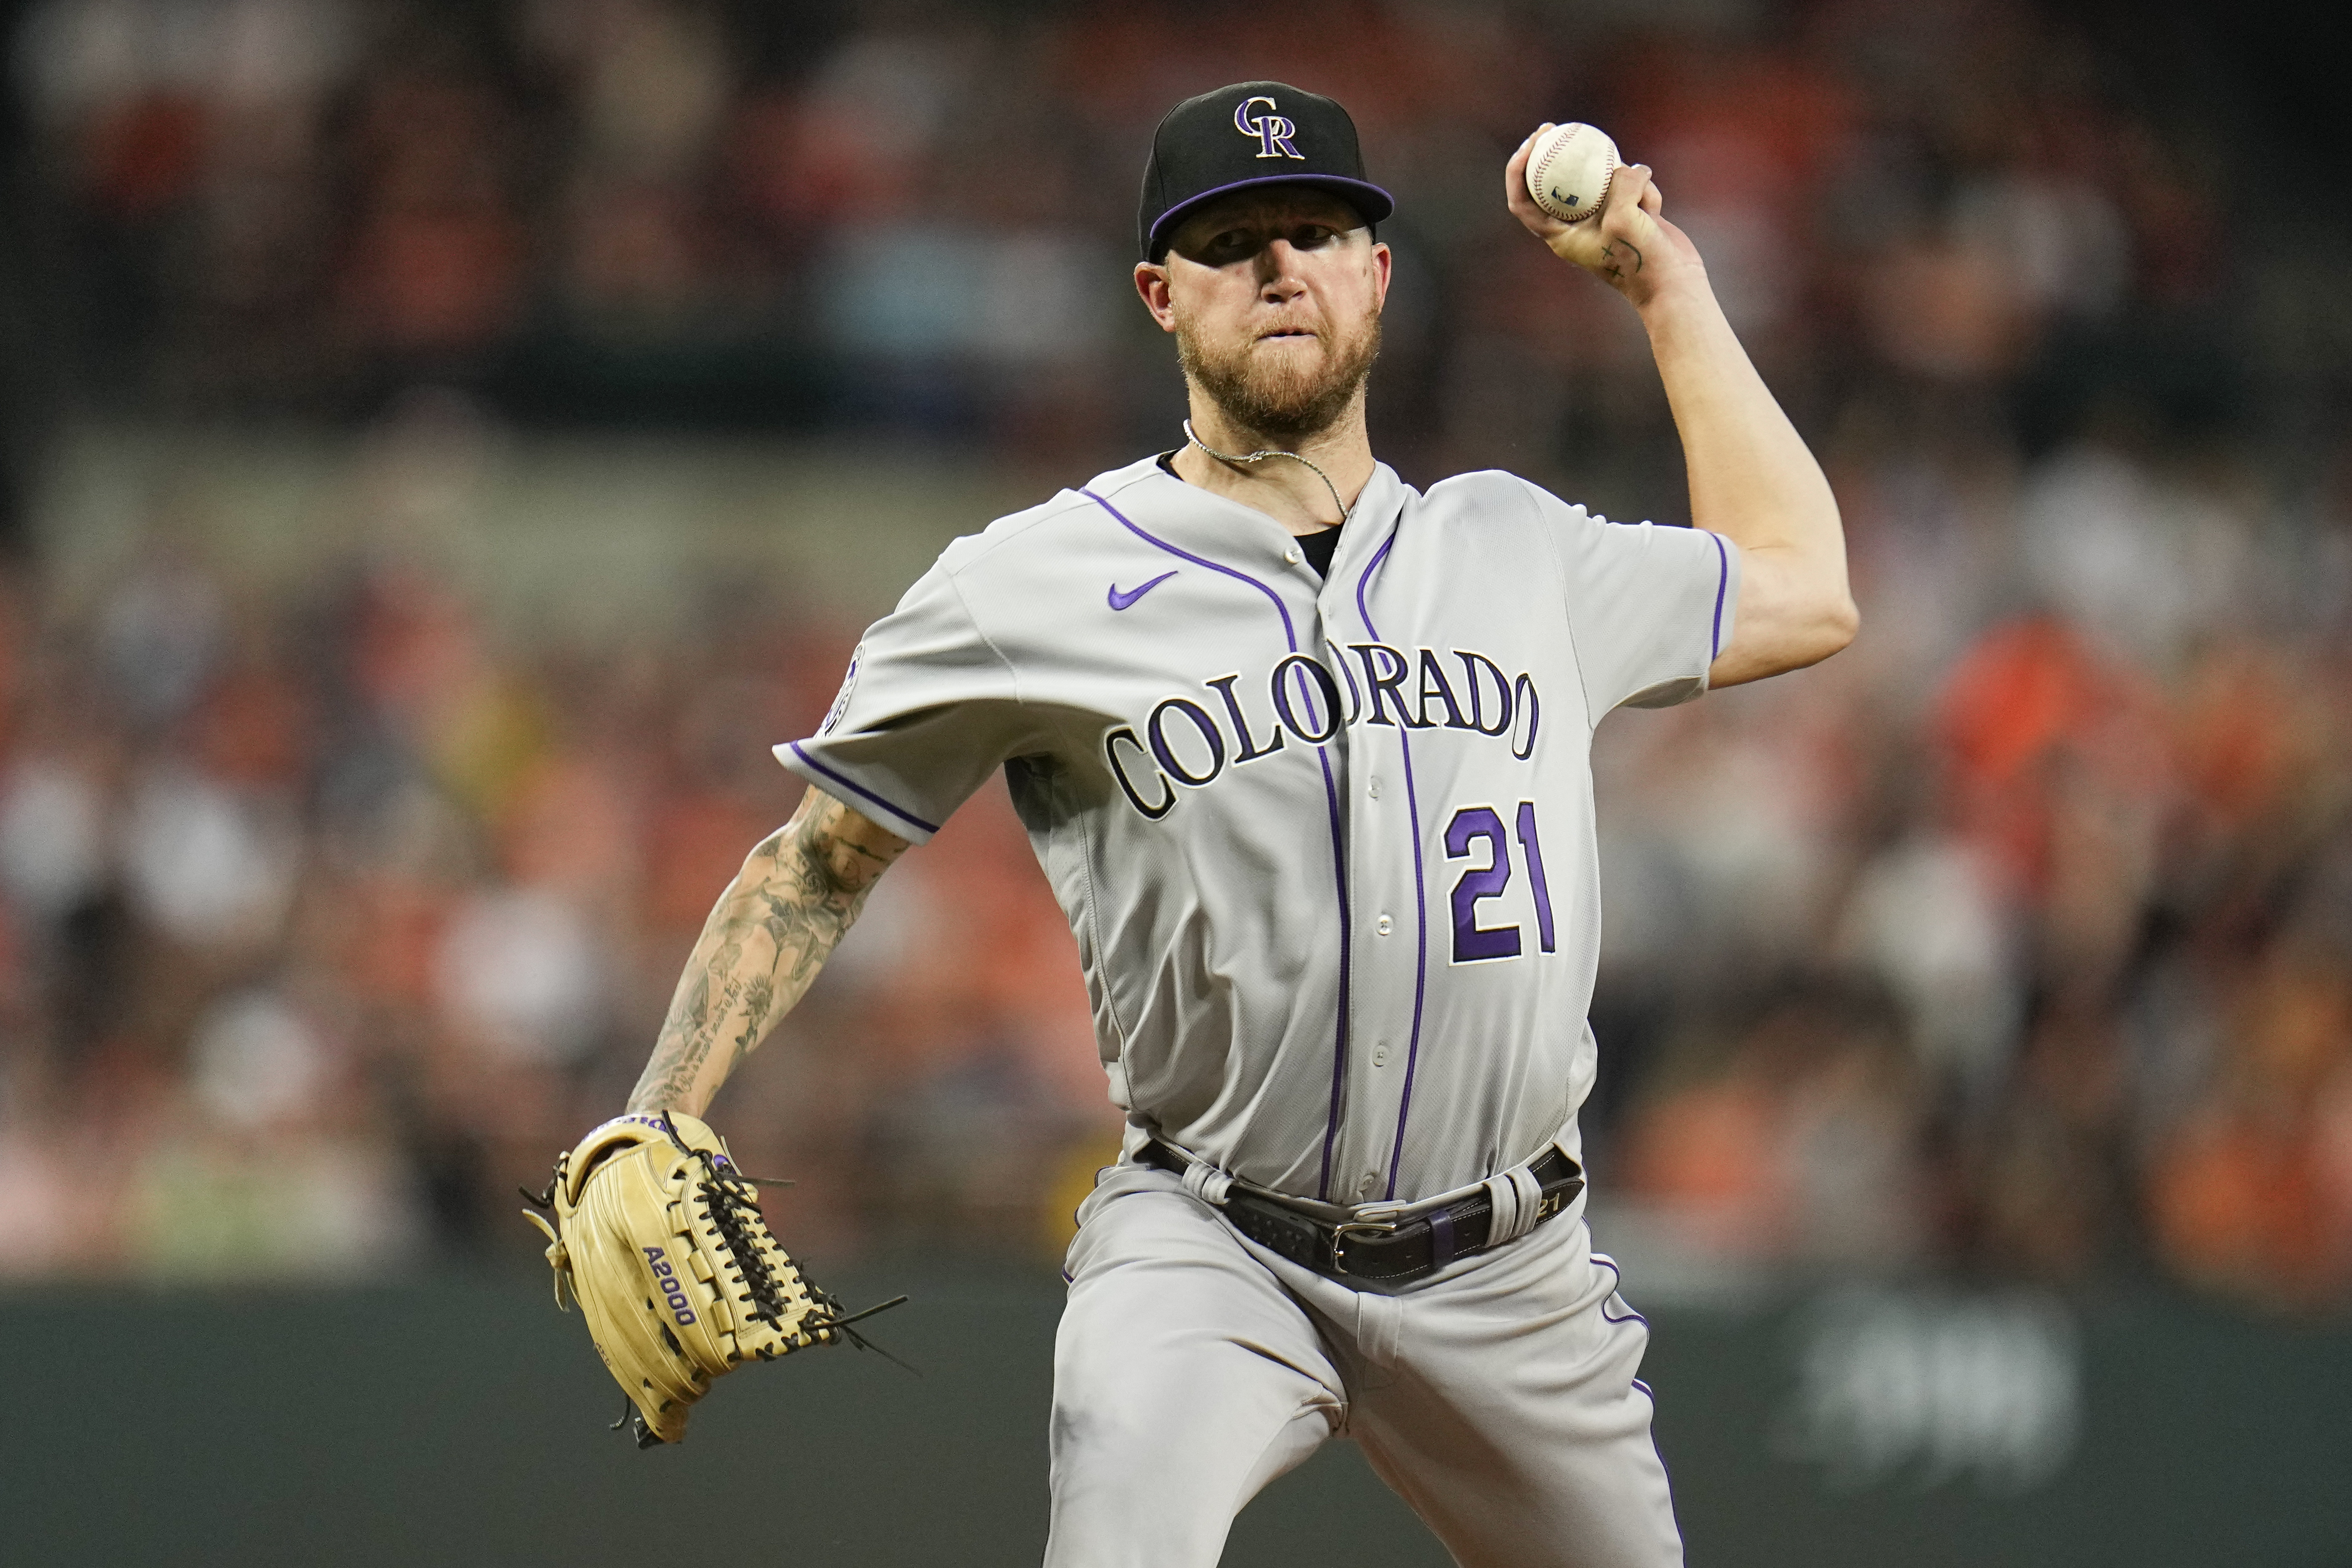 Freeland's great play, Blackmon HR carry Rockies past Padres